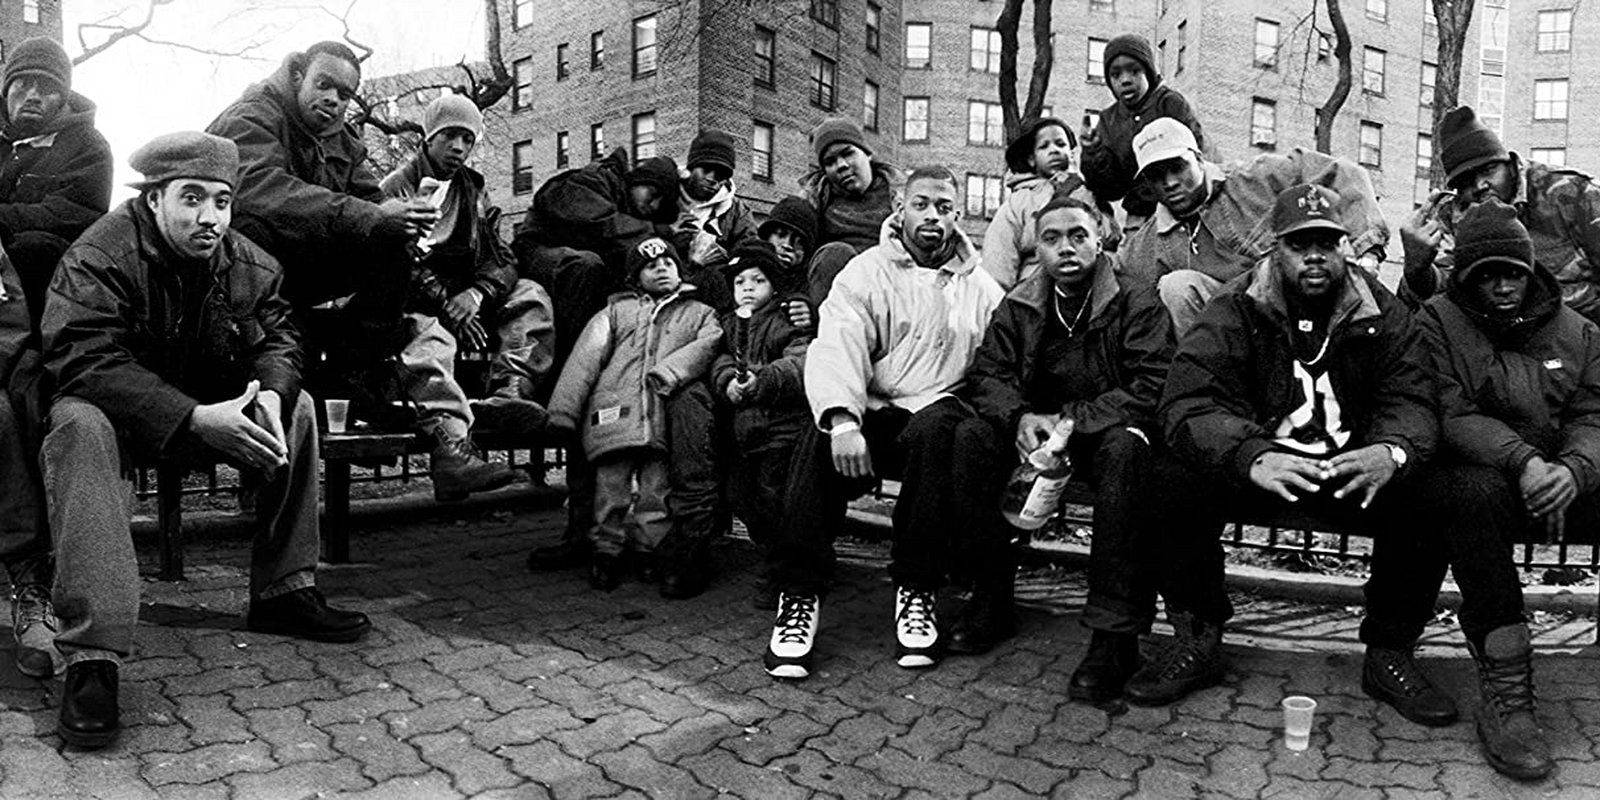 Nas - Time is Illmatic